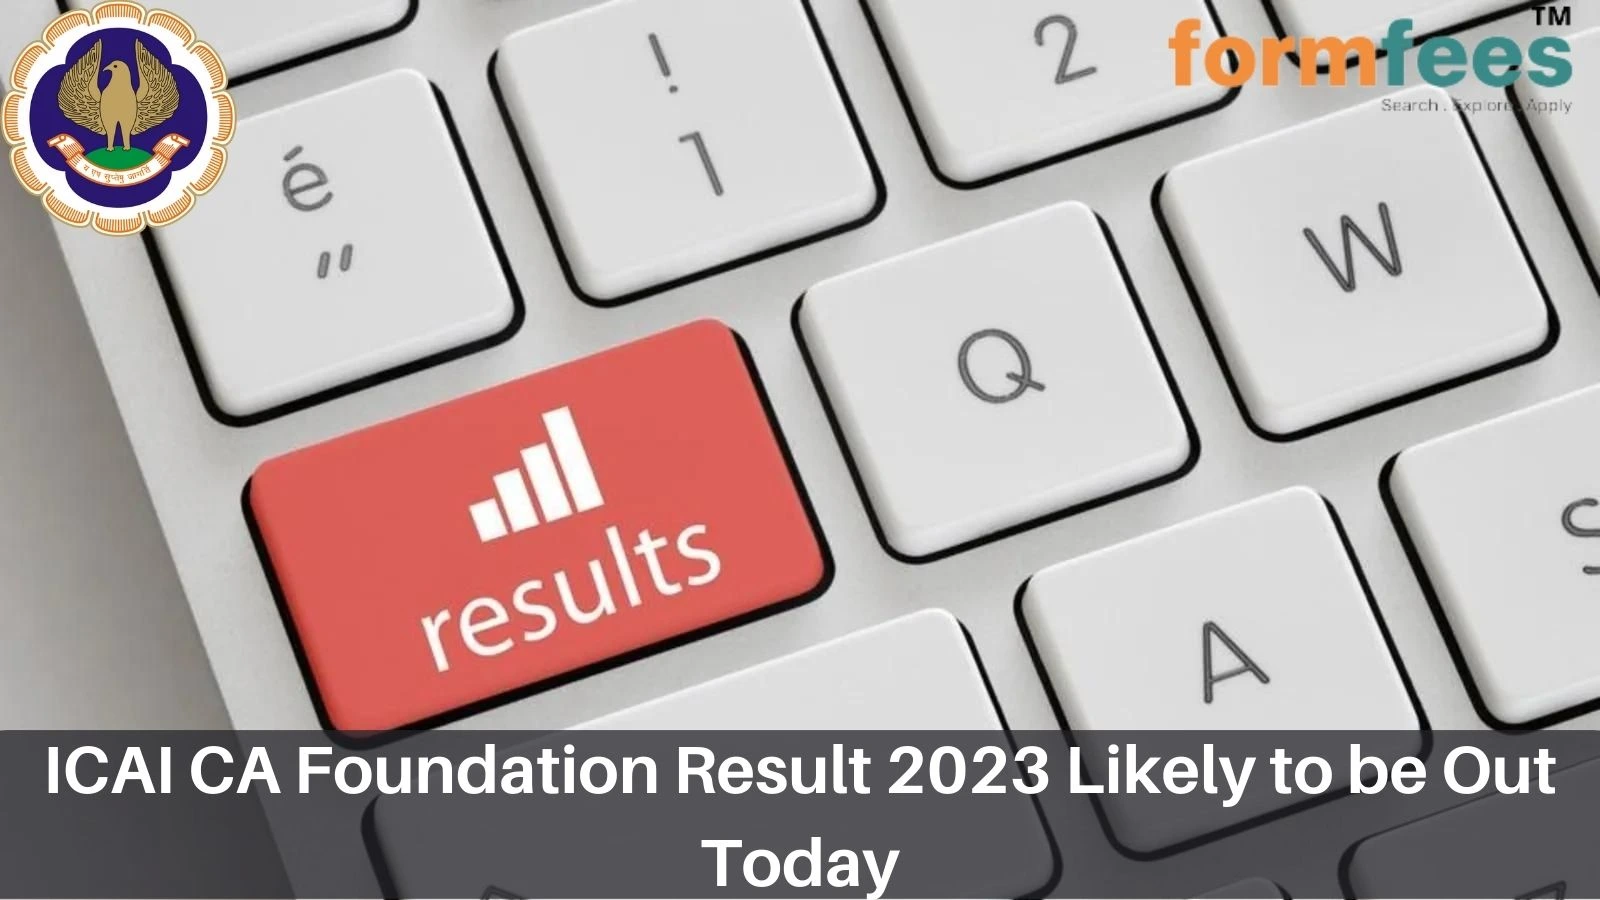 ICAI CA Foundation Result 2023 Likely to be Out Today